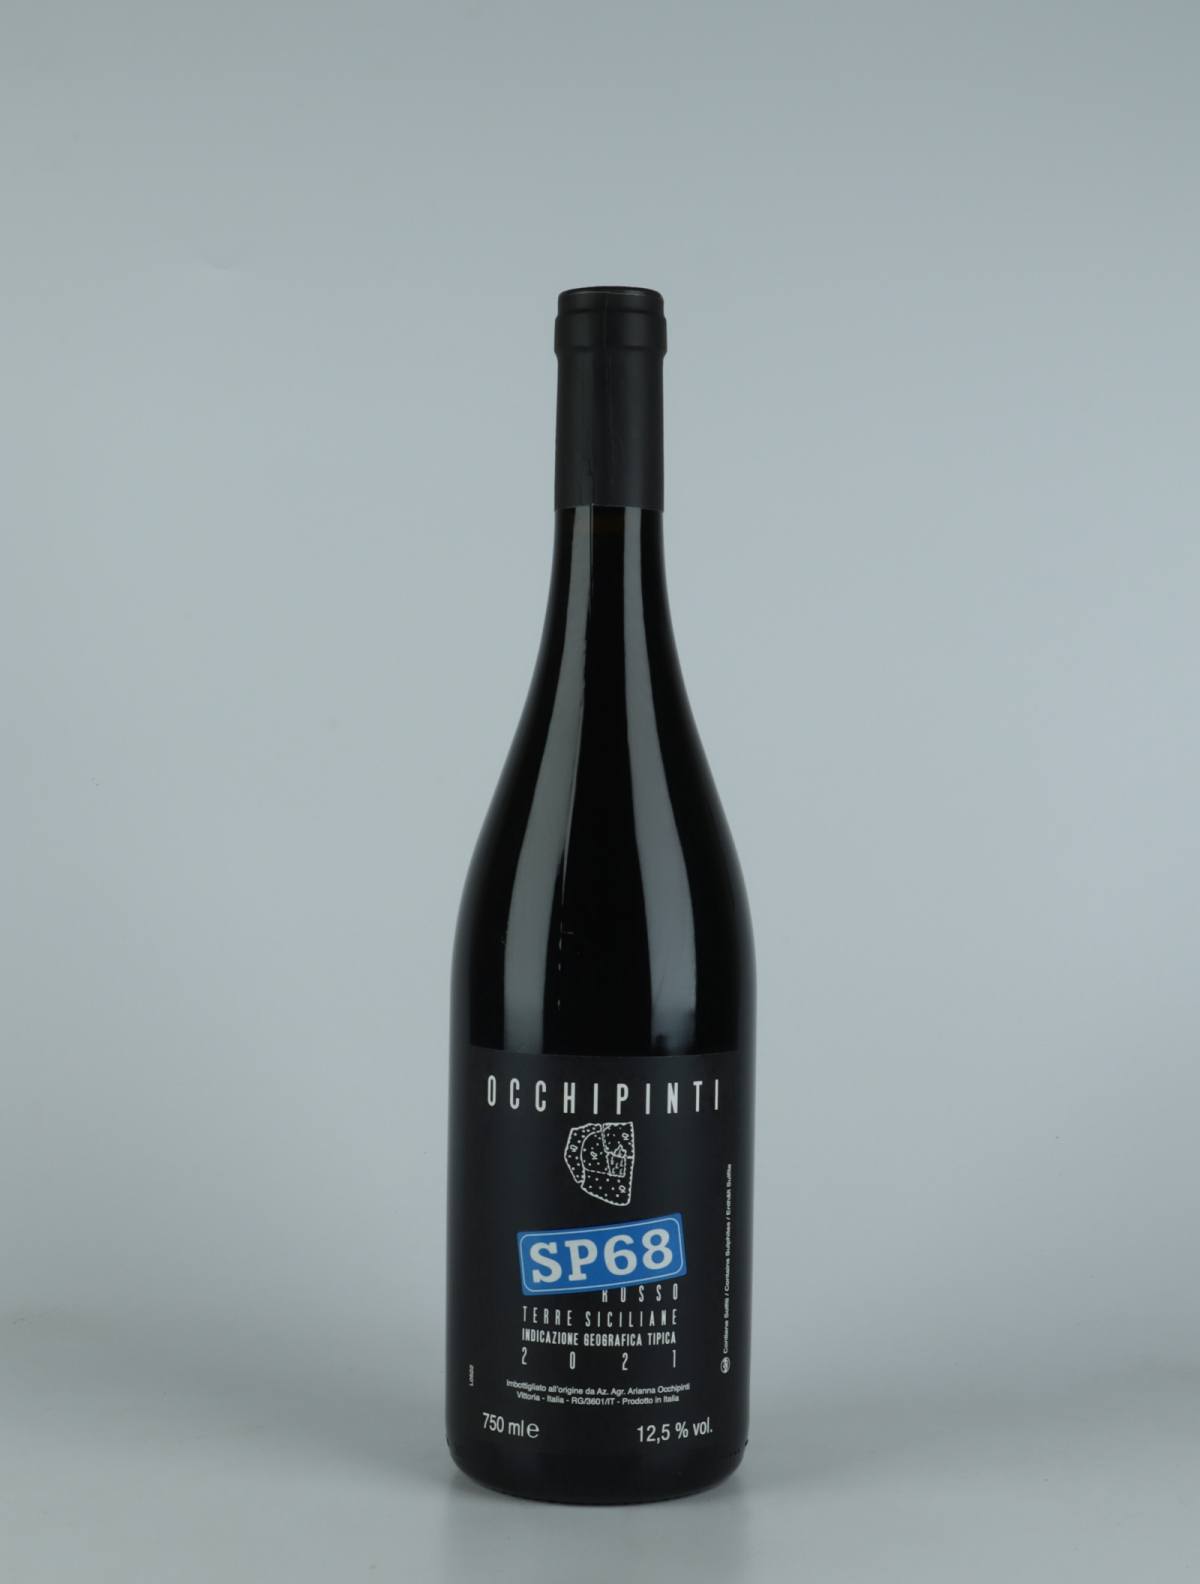 A bottle 2021 SP68 Rosso Red wine from Arianna Occhipinti, Sicily in Italy